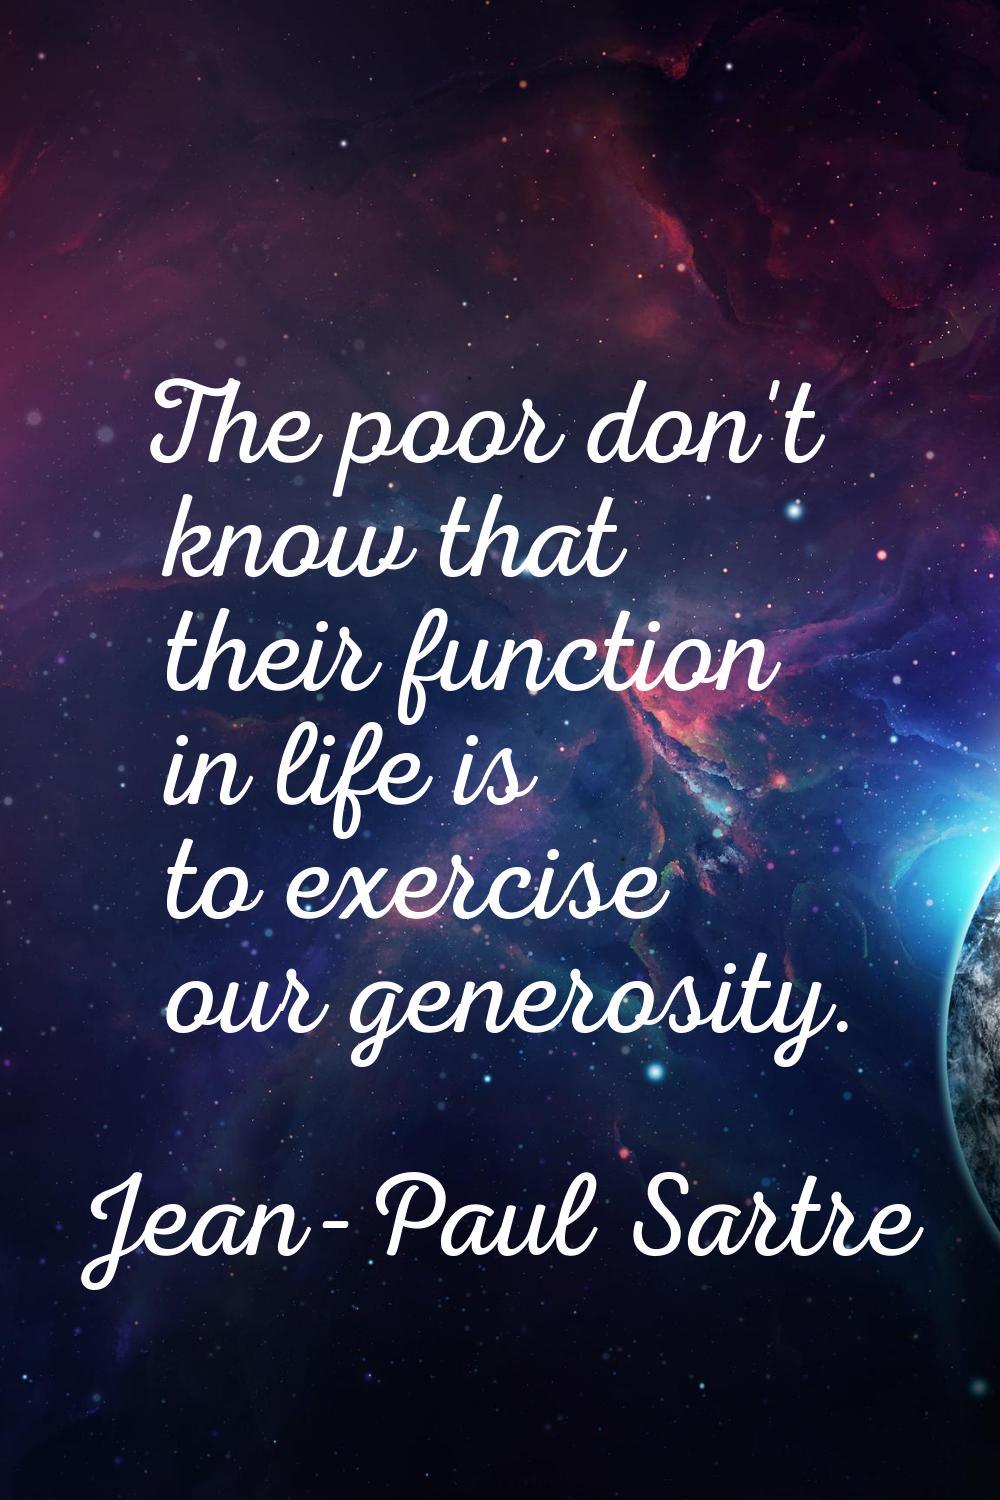 The poor don't know that their function in life is to exercise our generosity.